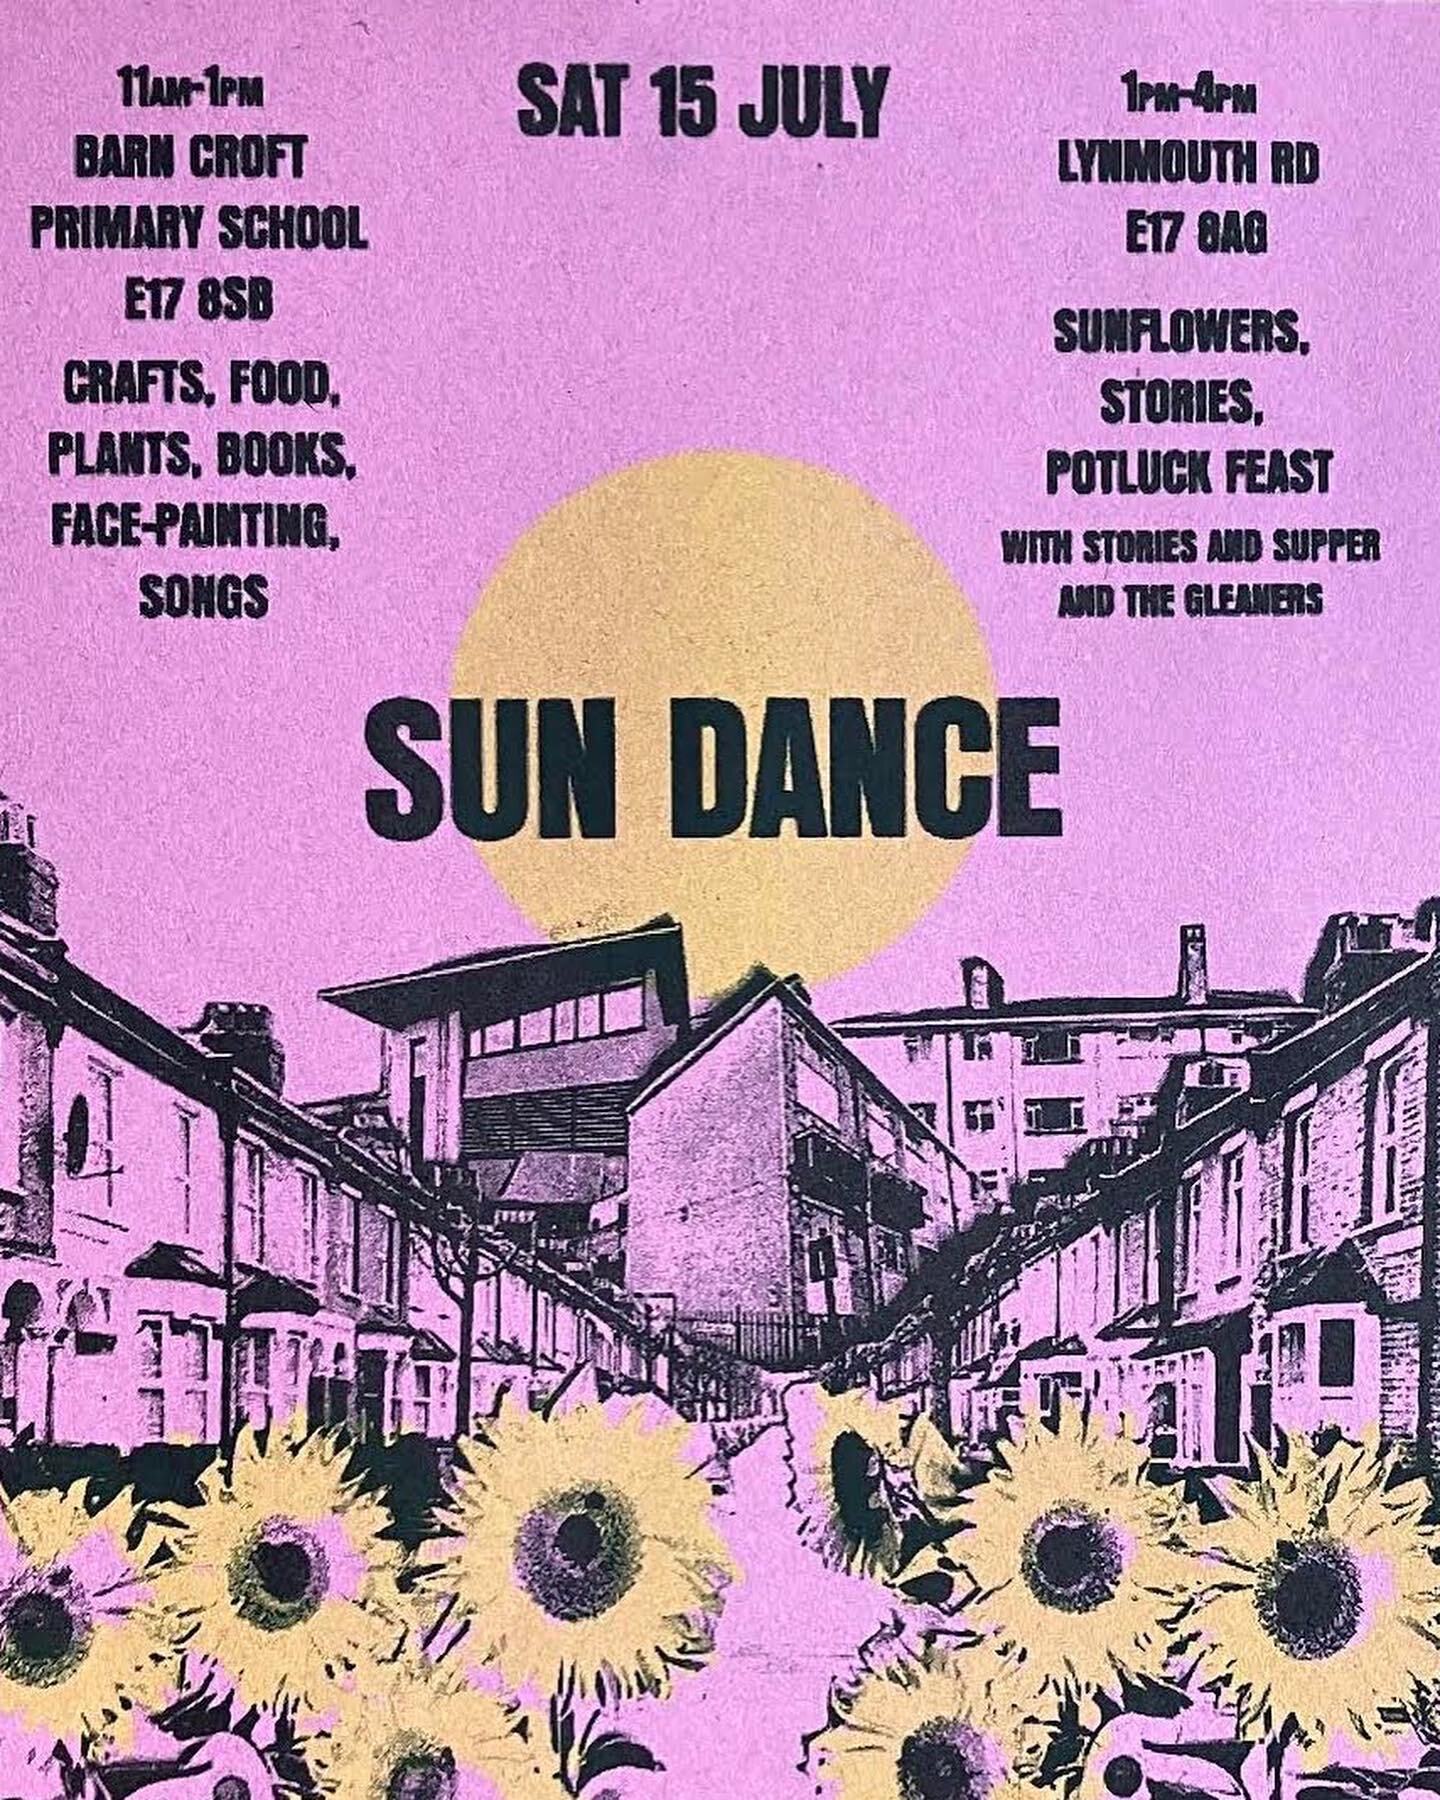 Starting up the riso printer for poster printing . SUN DANCE sat 15 July 1-4pm Lynmouth Road e178ag @stories_supper @the_gleaners_cafe 11-1pm at Barn Croft Primary School @friends_of_barn_croft #sunflowers #summer #street #school #solar #risoprint #s